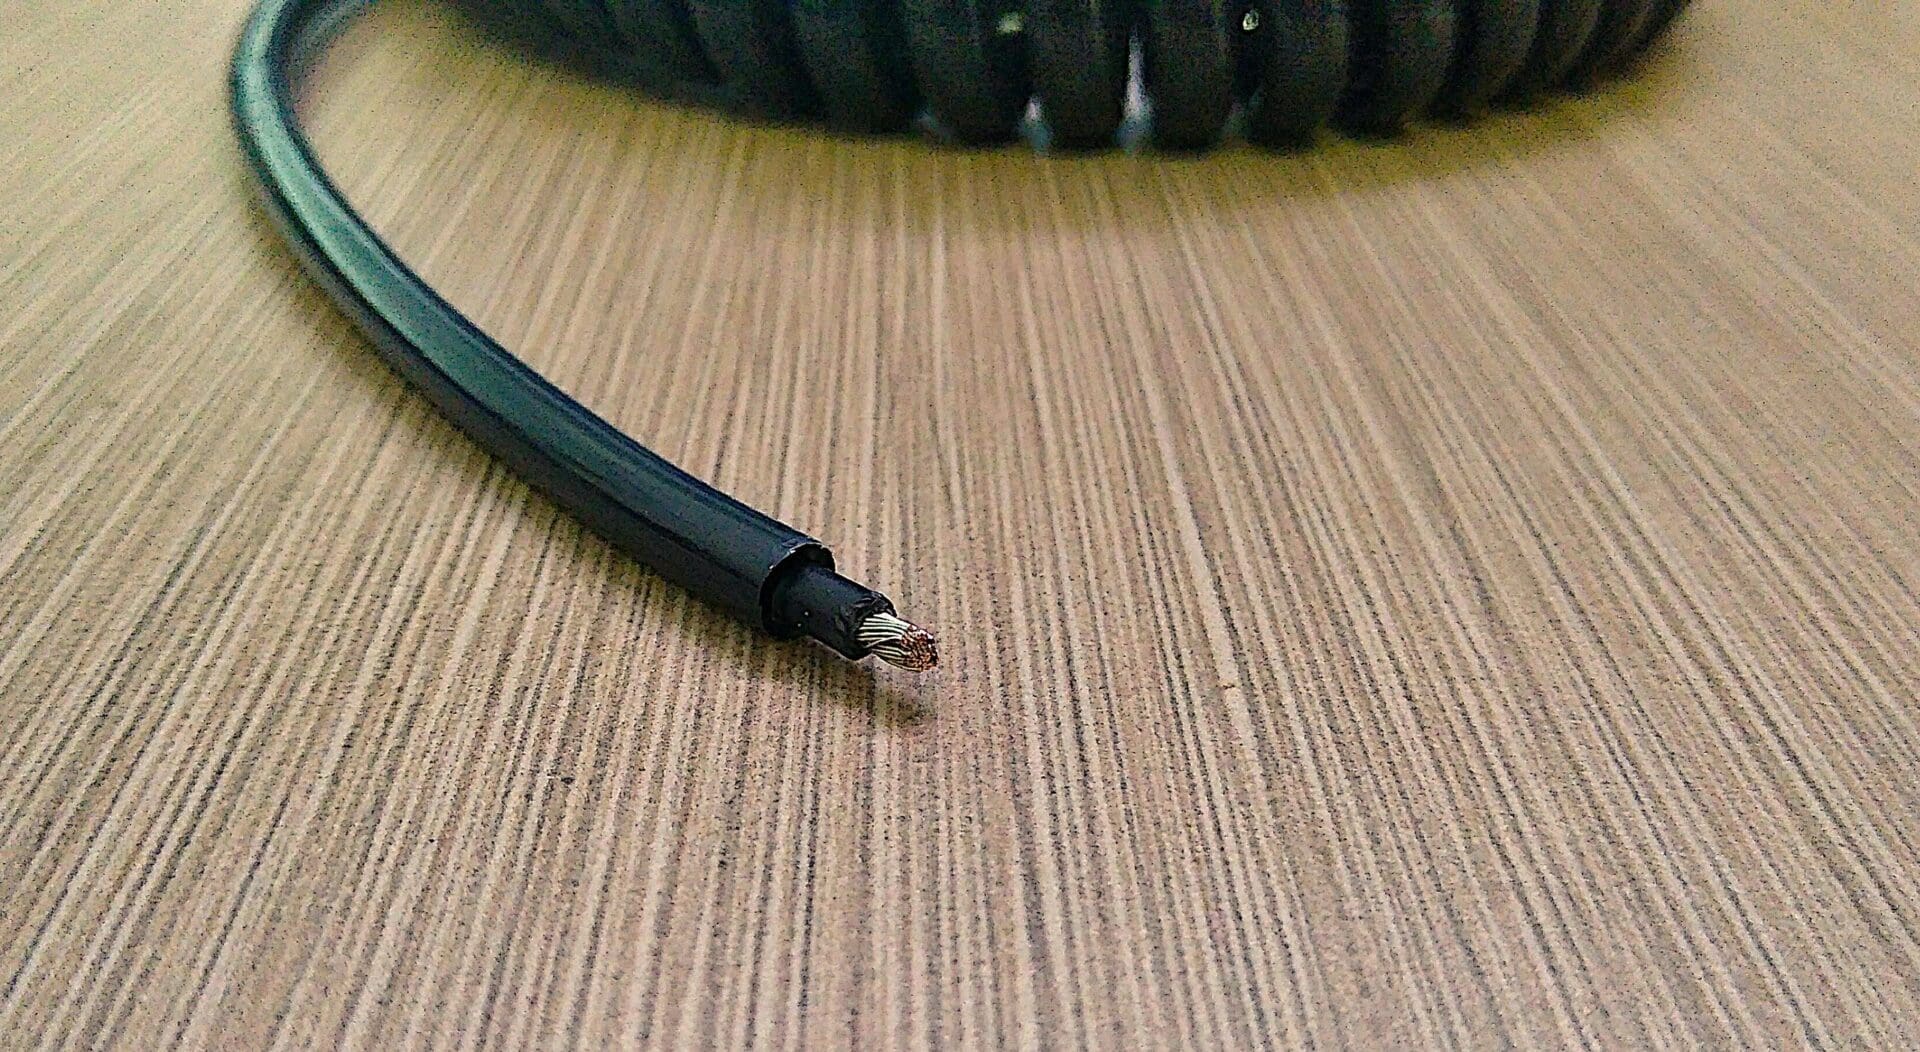 A black coiled cable on a wooden table.